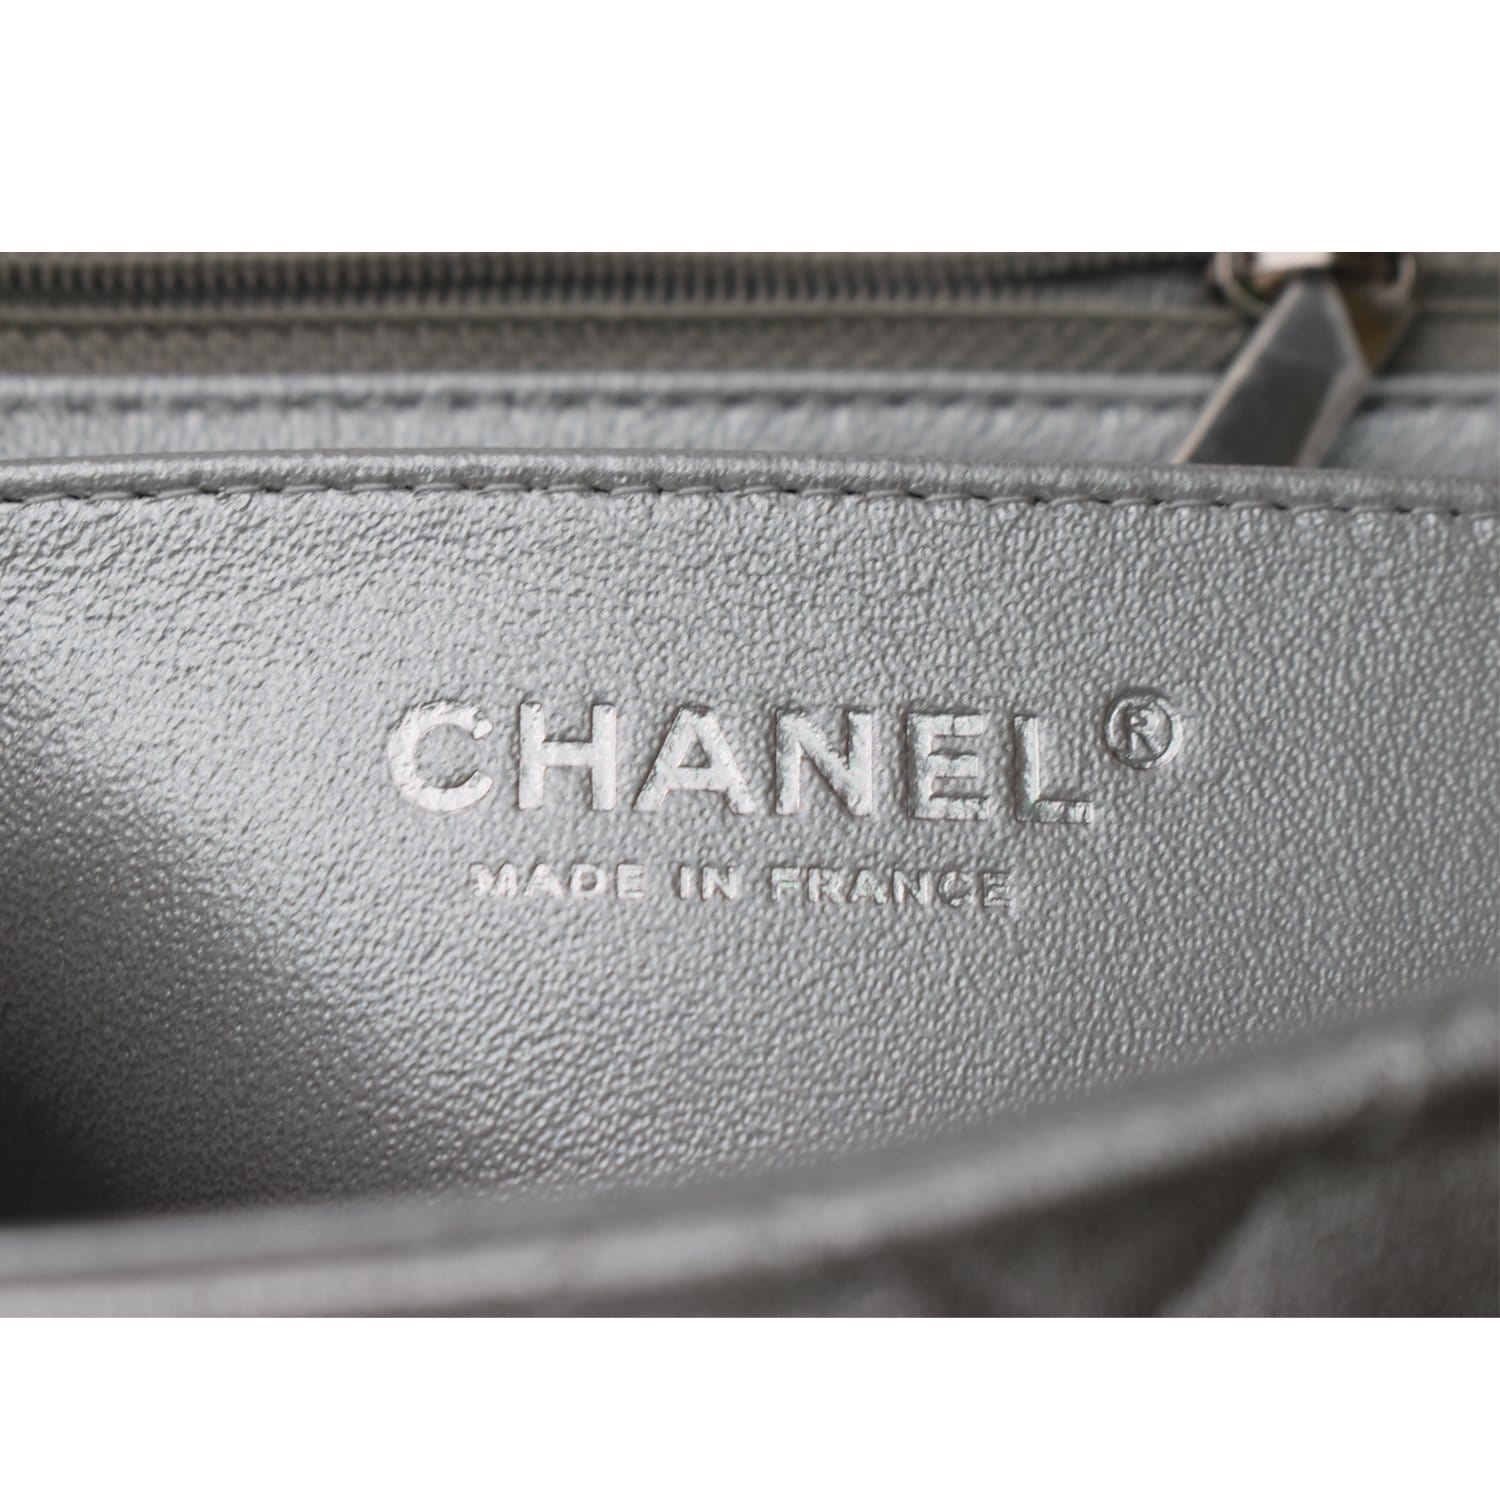 Chanel Authenticated Leather Handbag